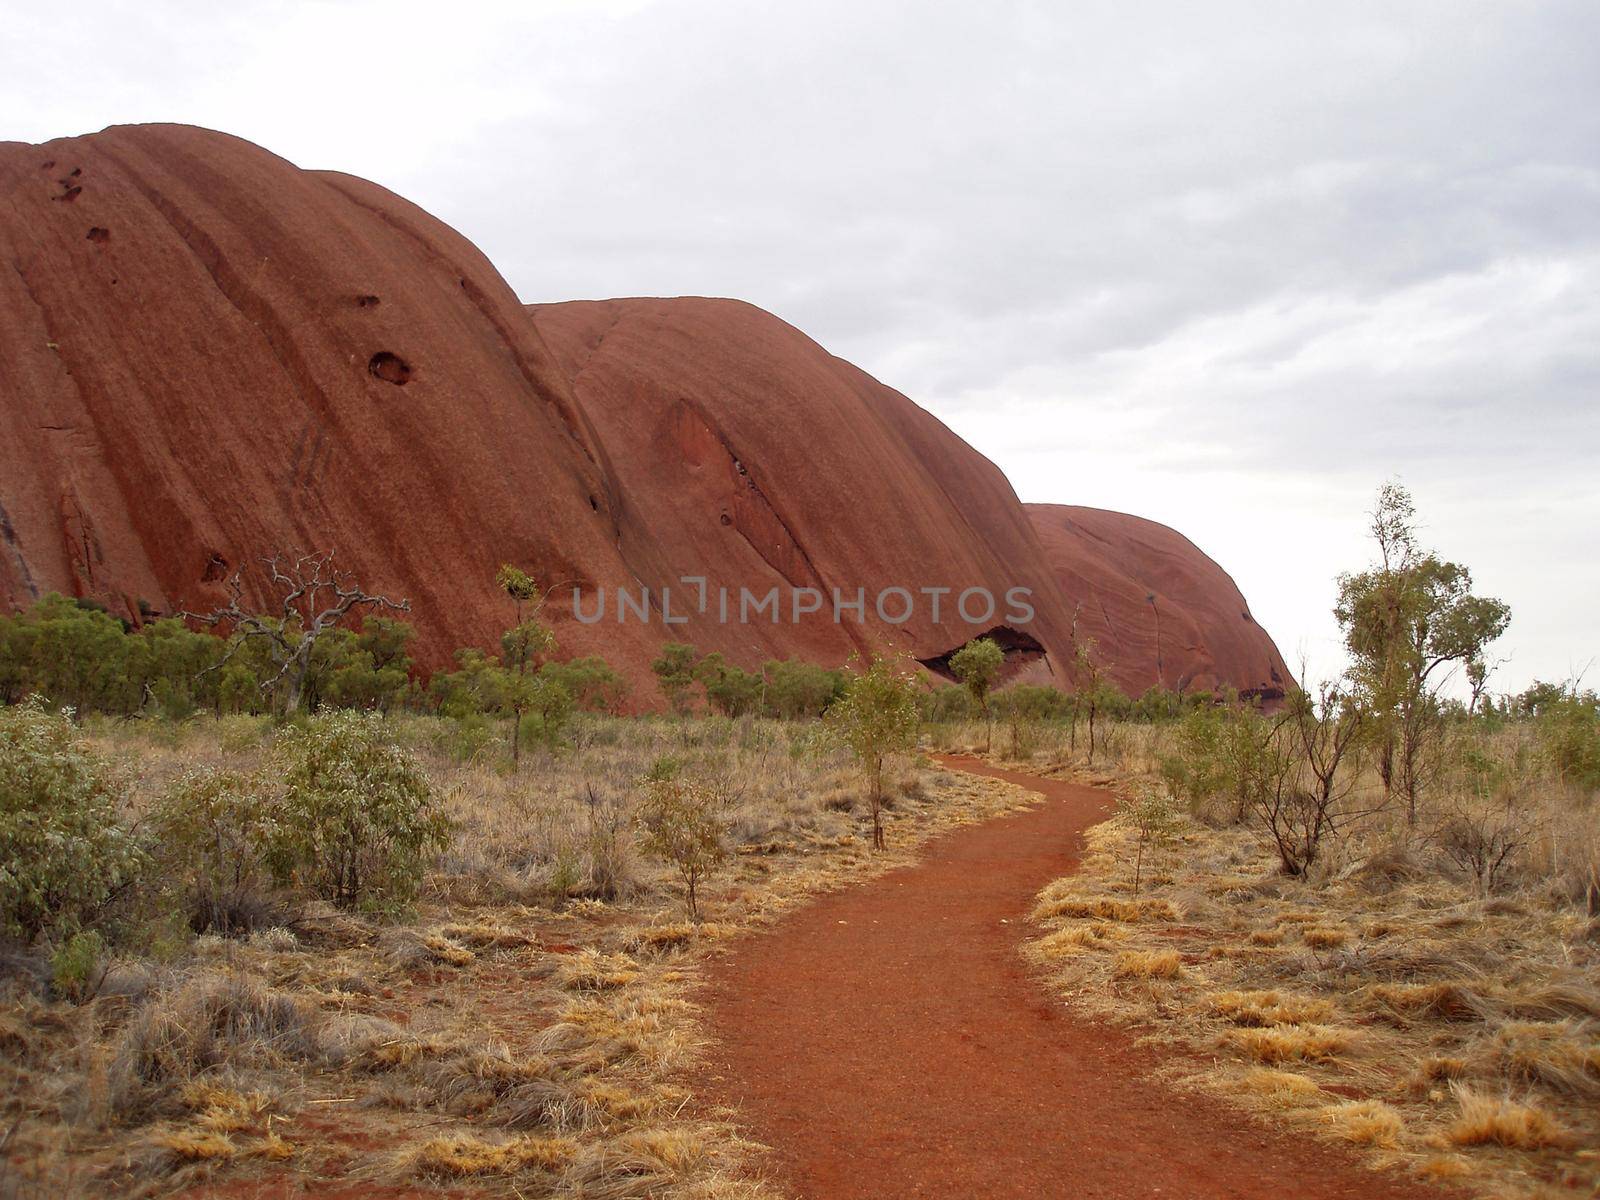 Close up view of Uluru-Ayers Rock, Australia a sandstone formation sacred to the Anangu, the Aboriginal people of the area and UNESCO World Heritage Site